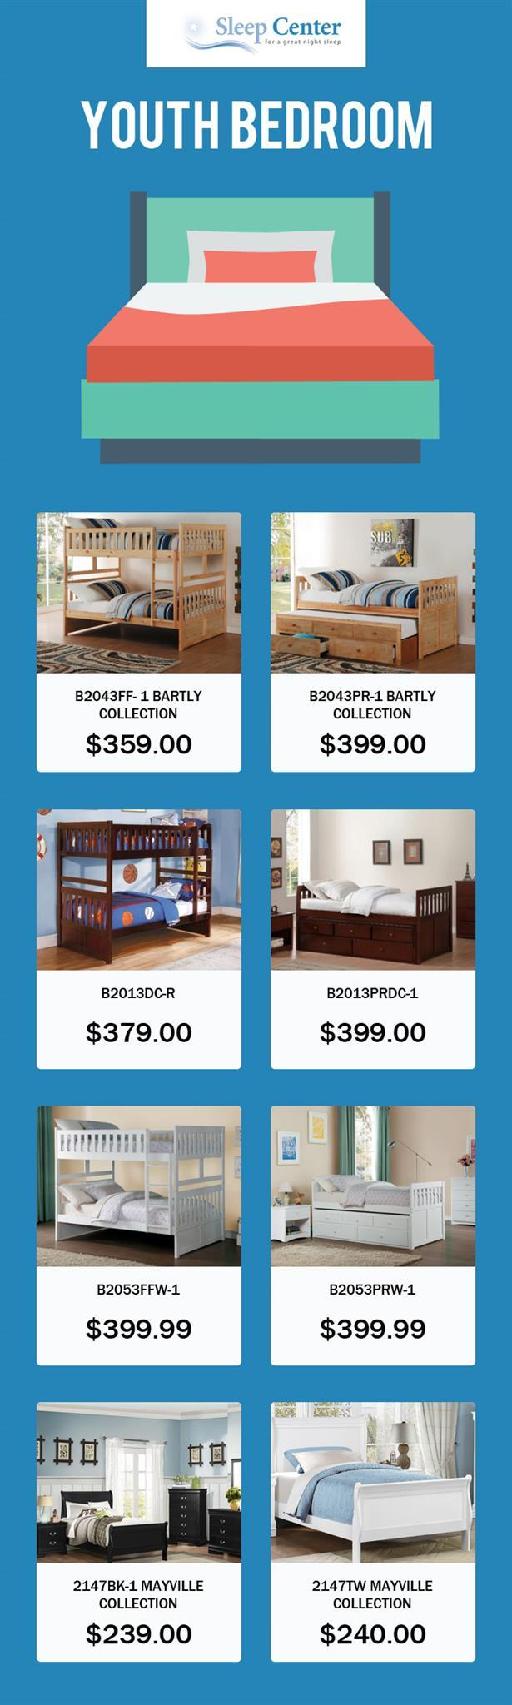 Sleep Center – Your One-Stop-Shop to Buy Youth Bedroom Furniture in Sacramento & Davis, CA